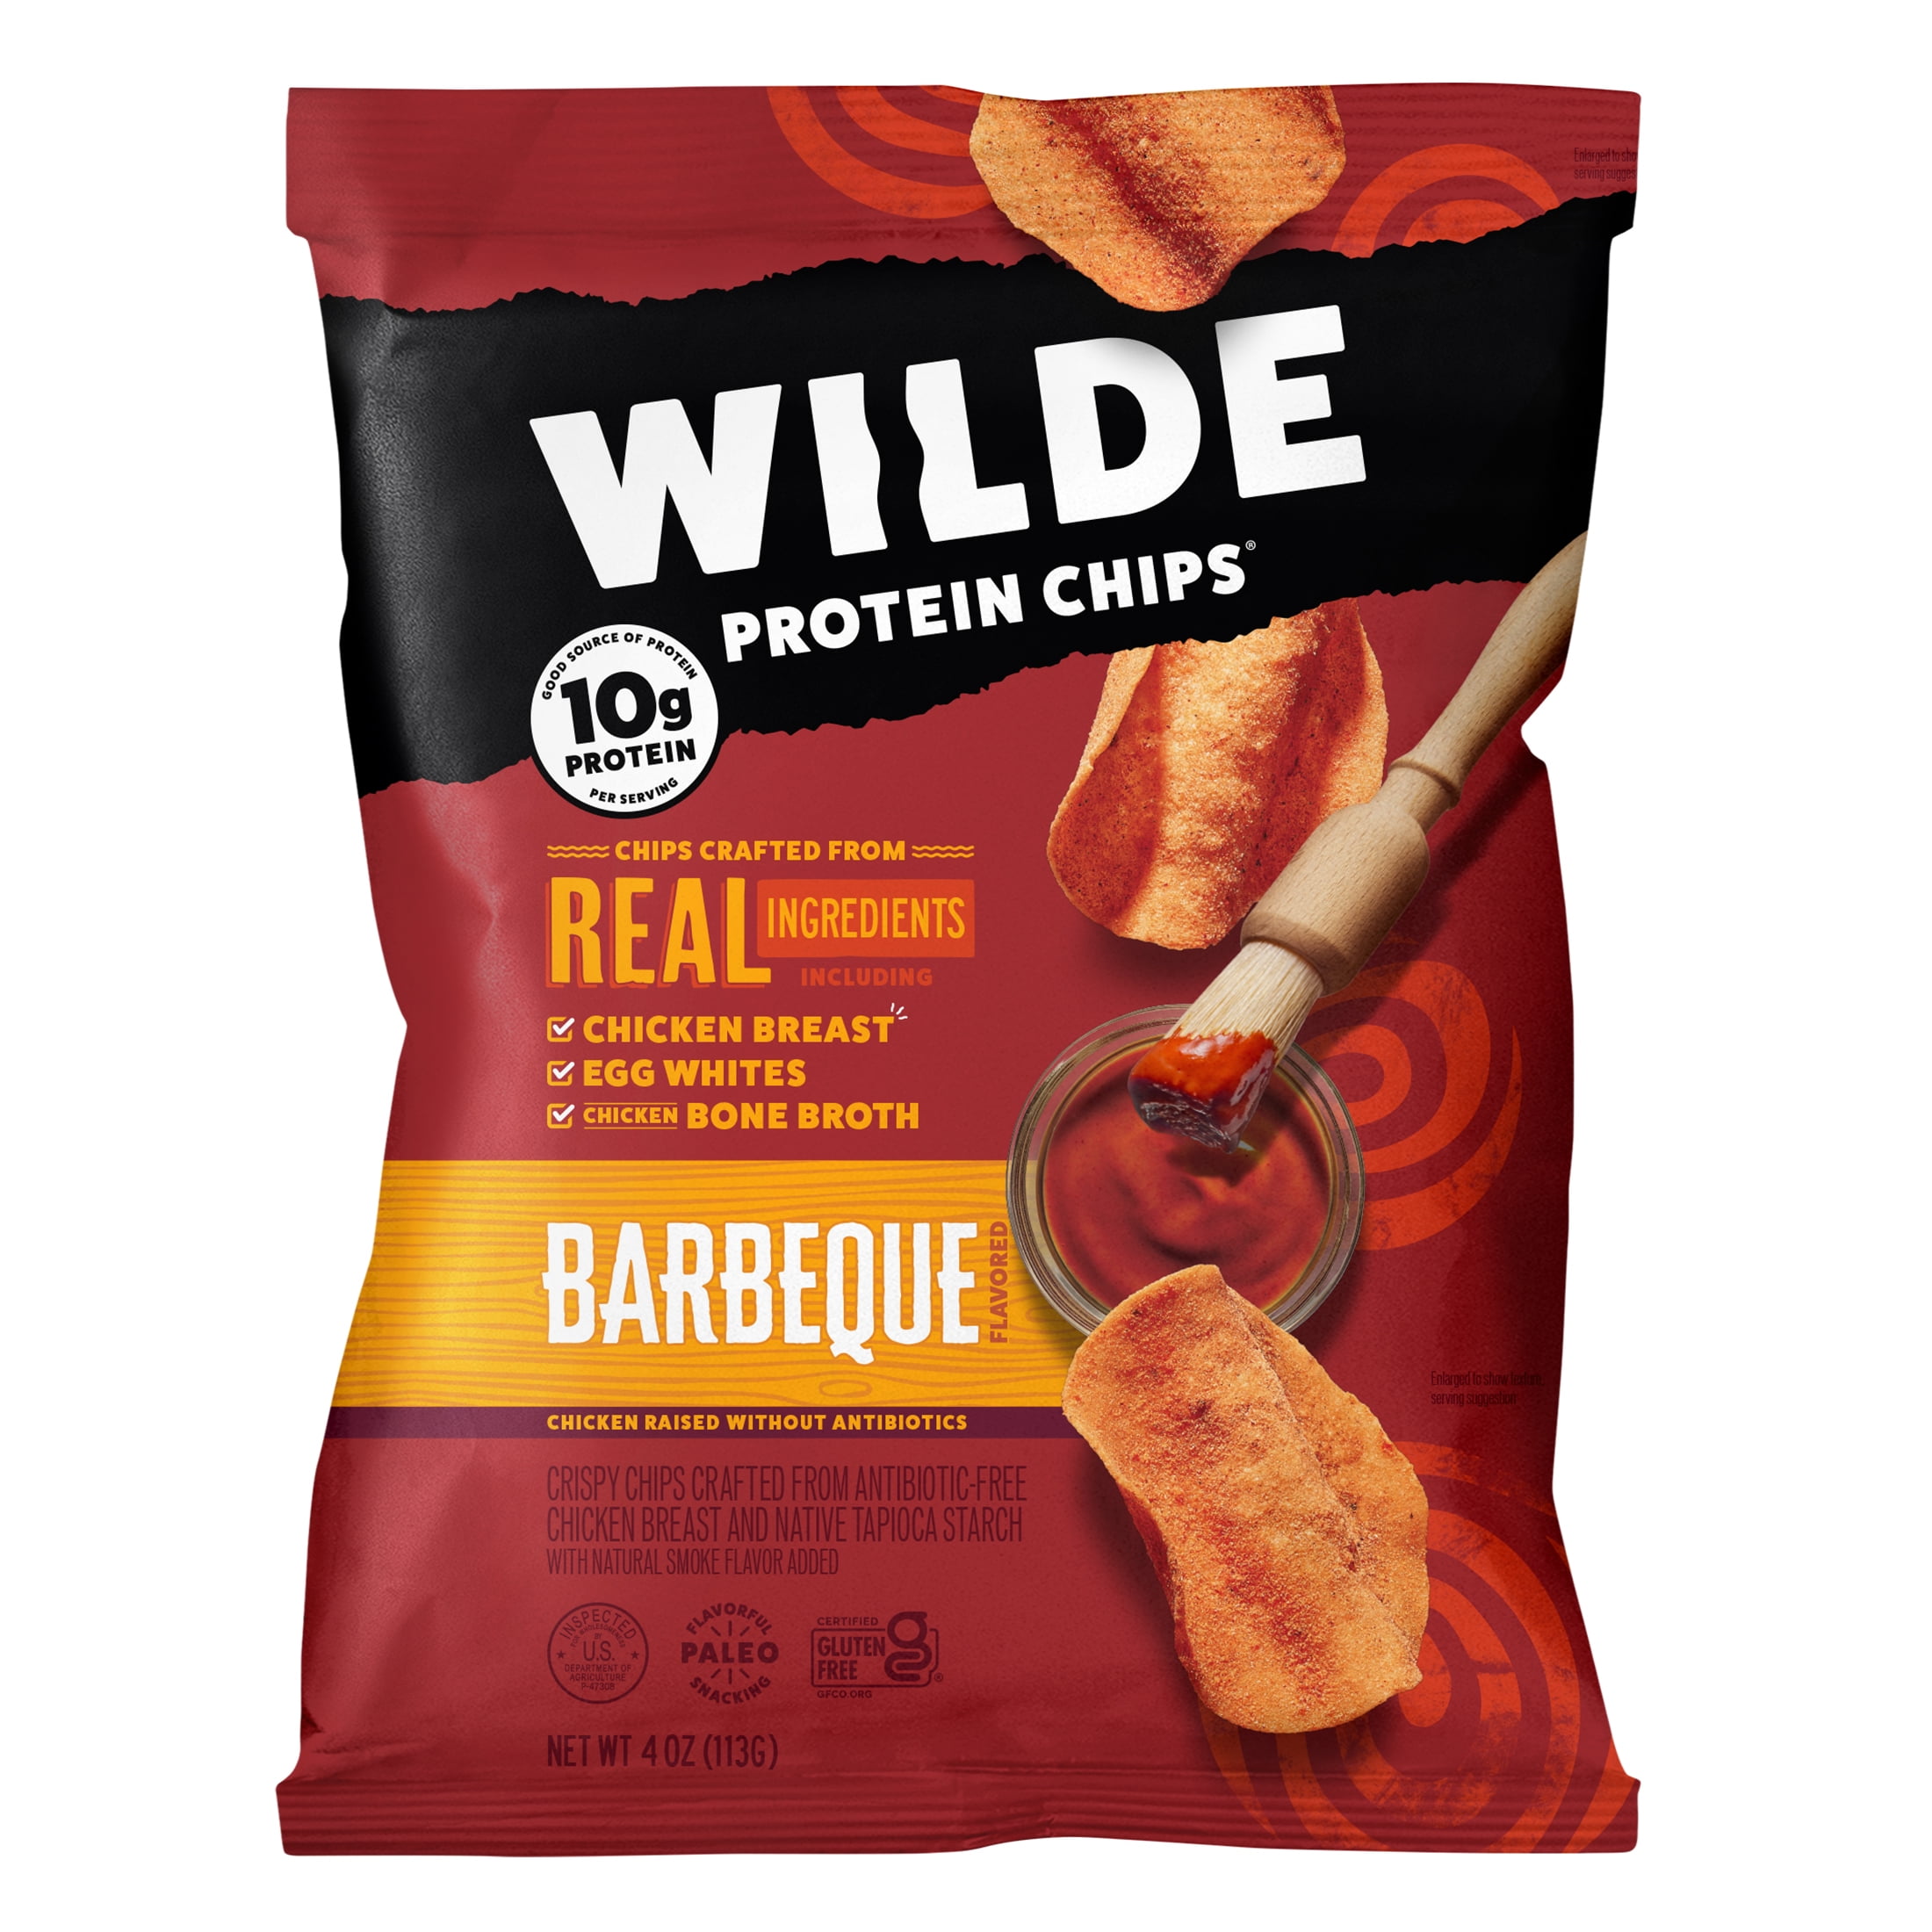 WILDE Protein Chips Barbeque 4.0oz